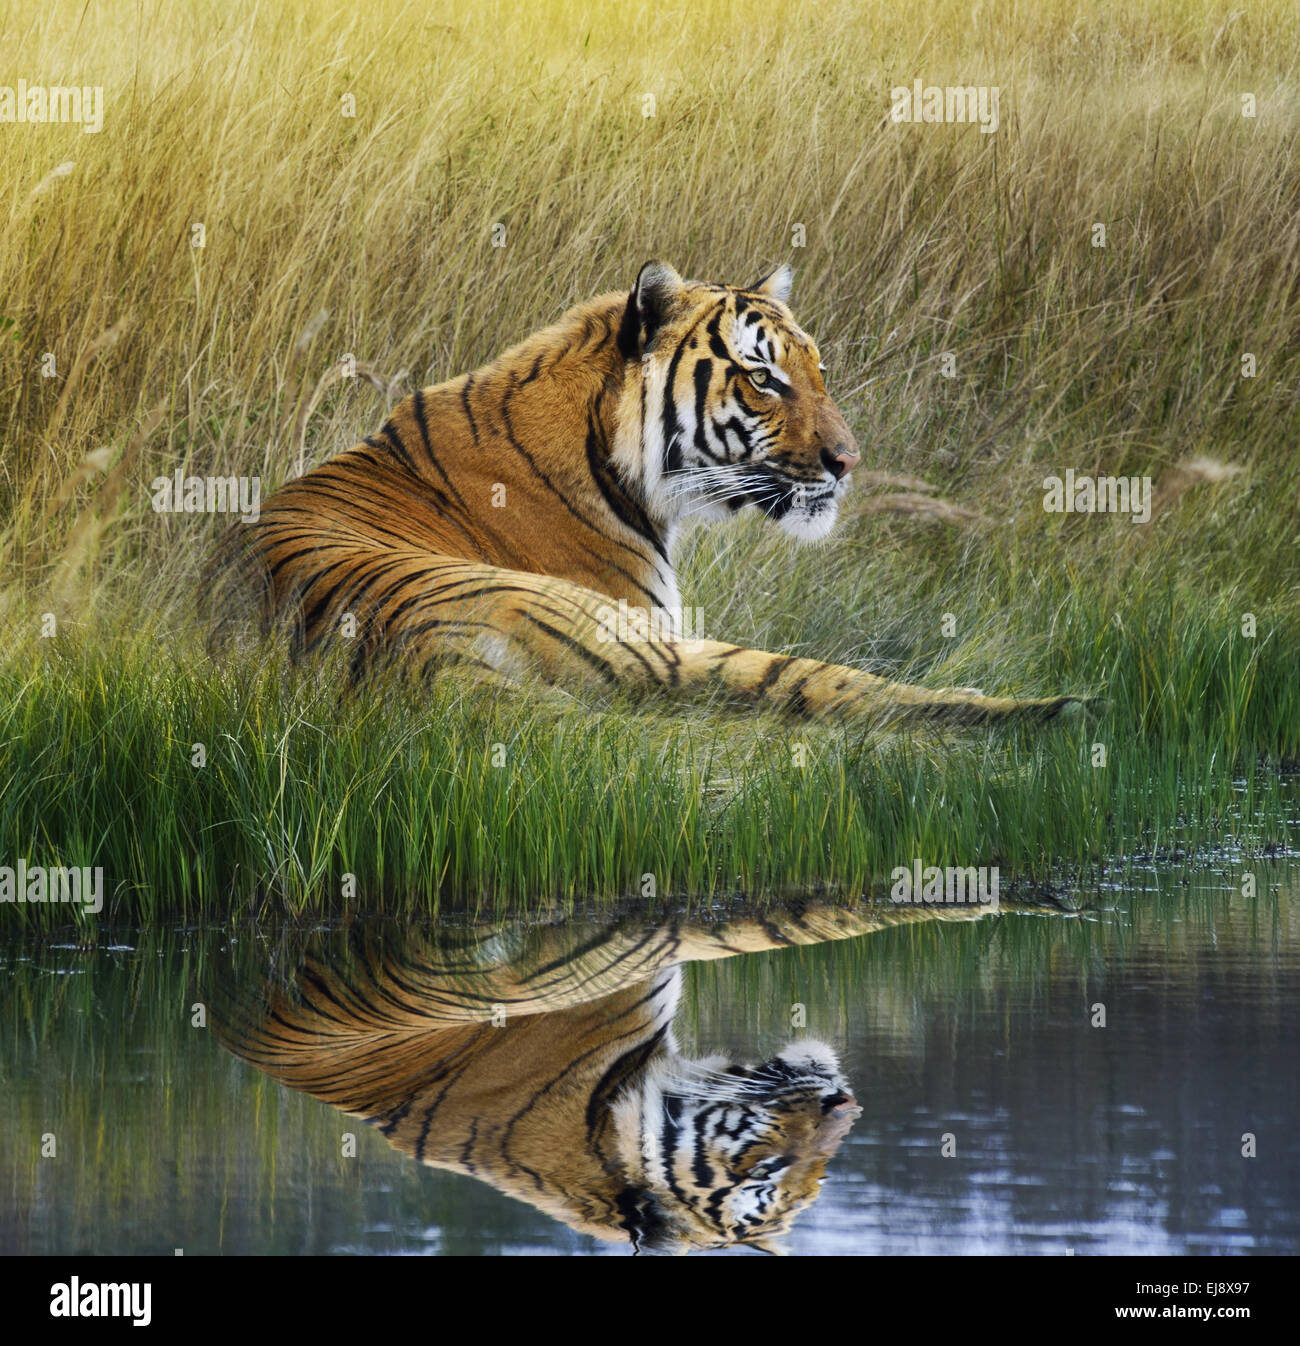 Tiger  On Grassy Bank With Reflection Stock Photo